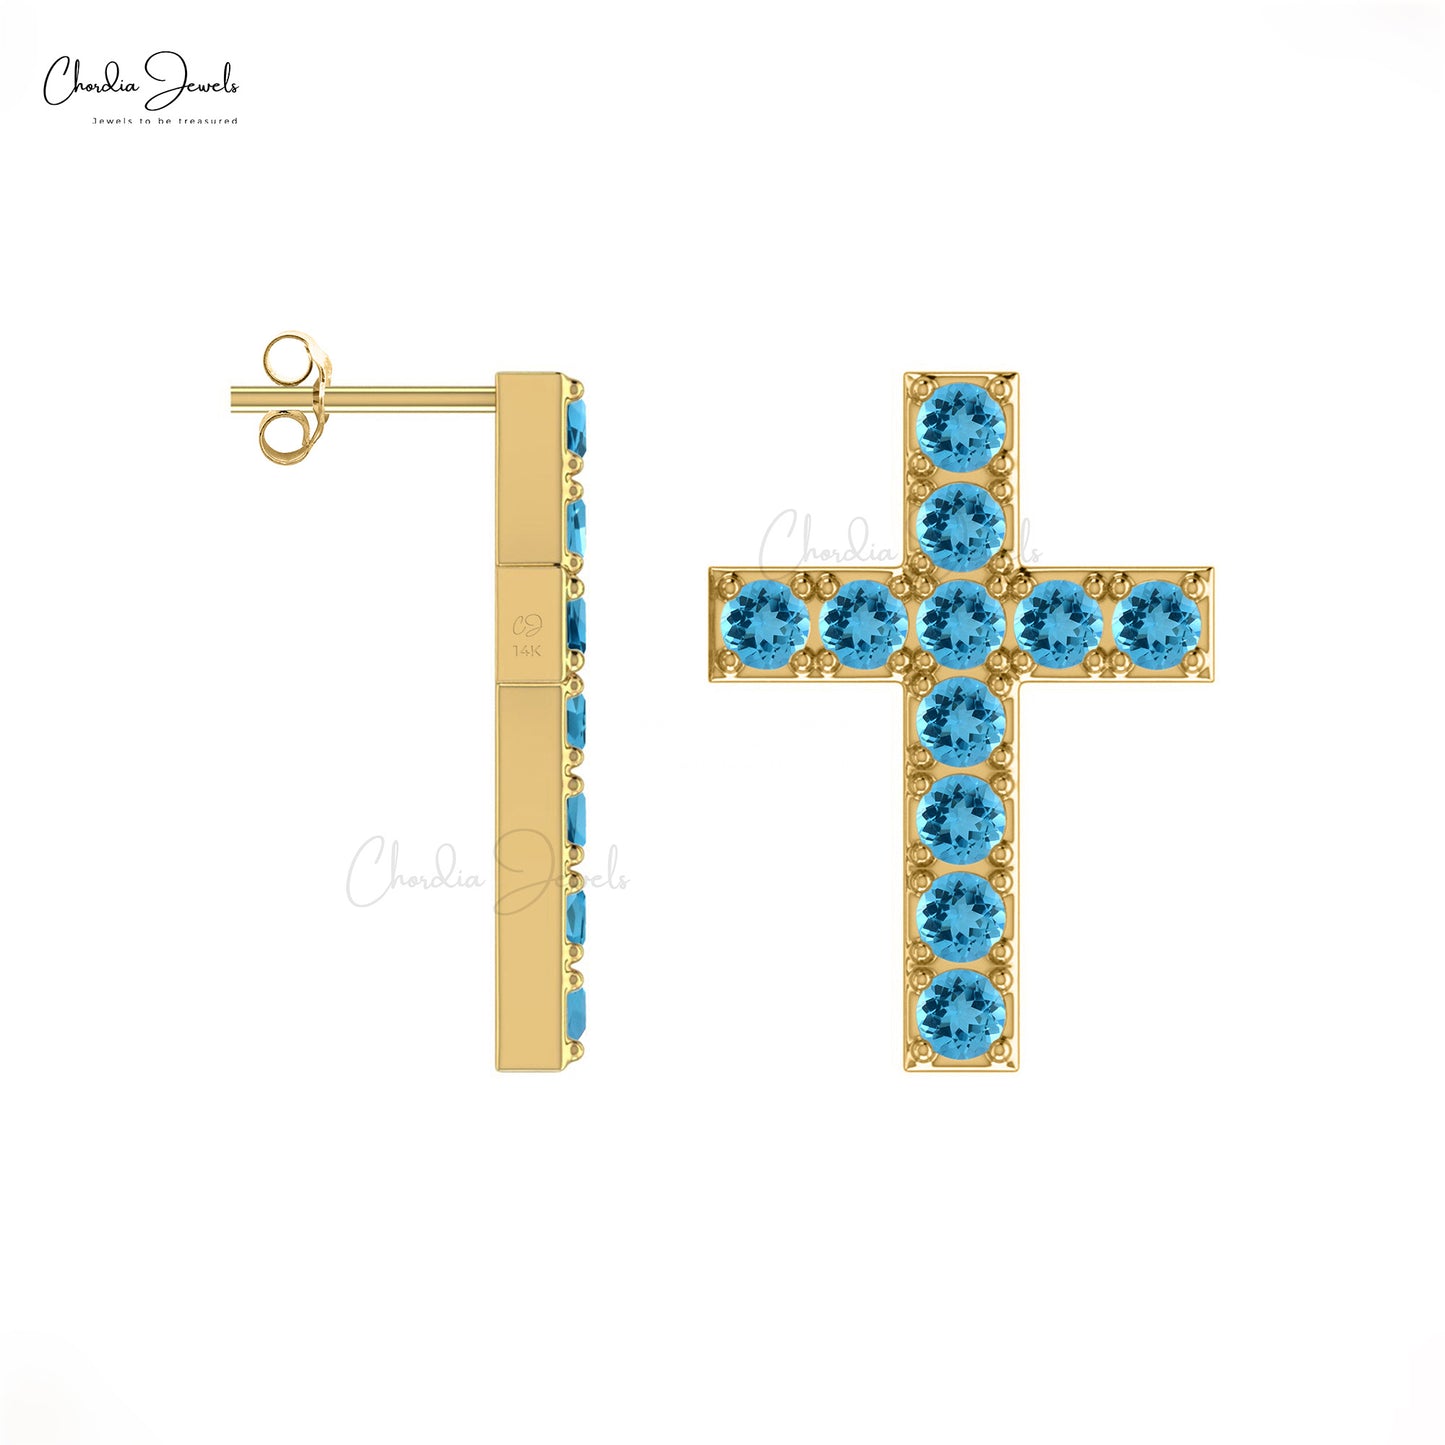 Natural Swiss Blue Topaz 2mm Round Cut Pave Set Gemstone Cross Studs 14k Solid Gold December Birthstone Stud Earrings Hallmarked Jewelry For Women